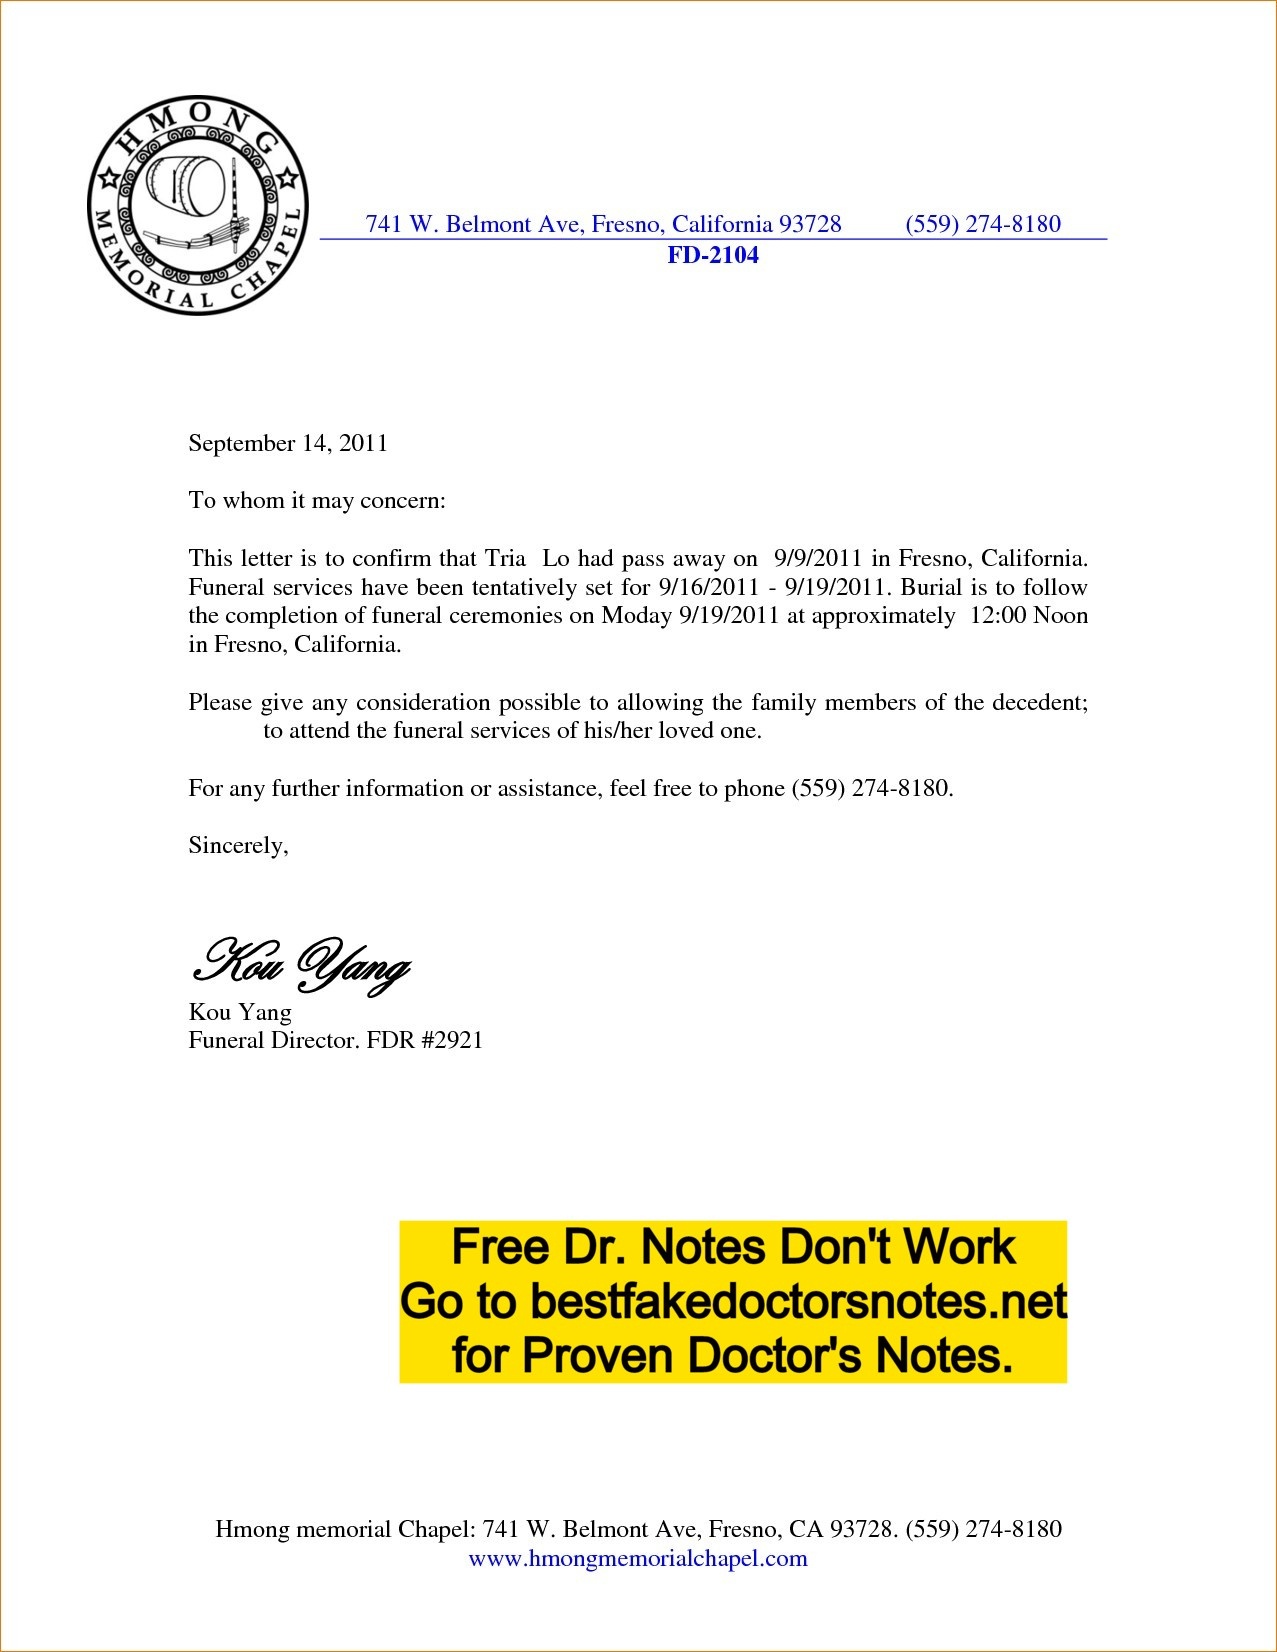 4 Easy Ways To Use A Printable Fake Doctors Note - Free Printable Doctors Note For Work